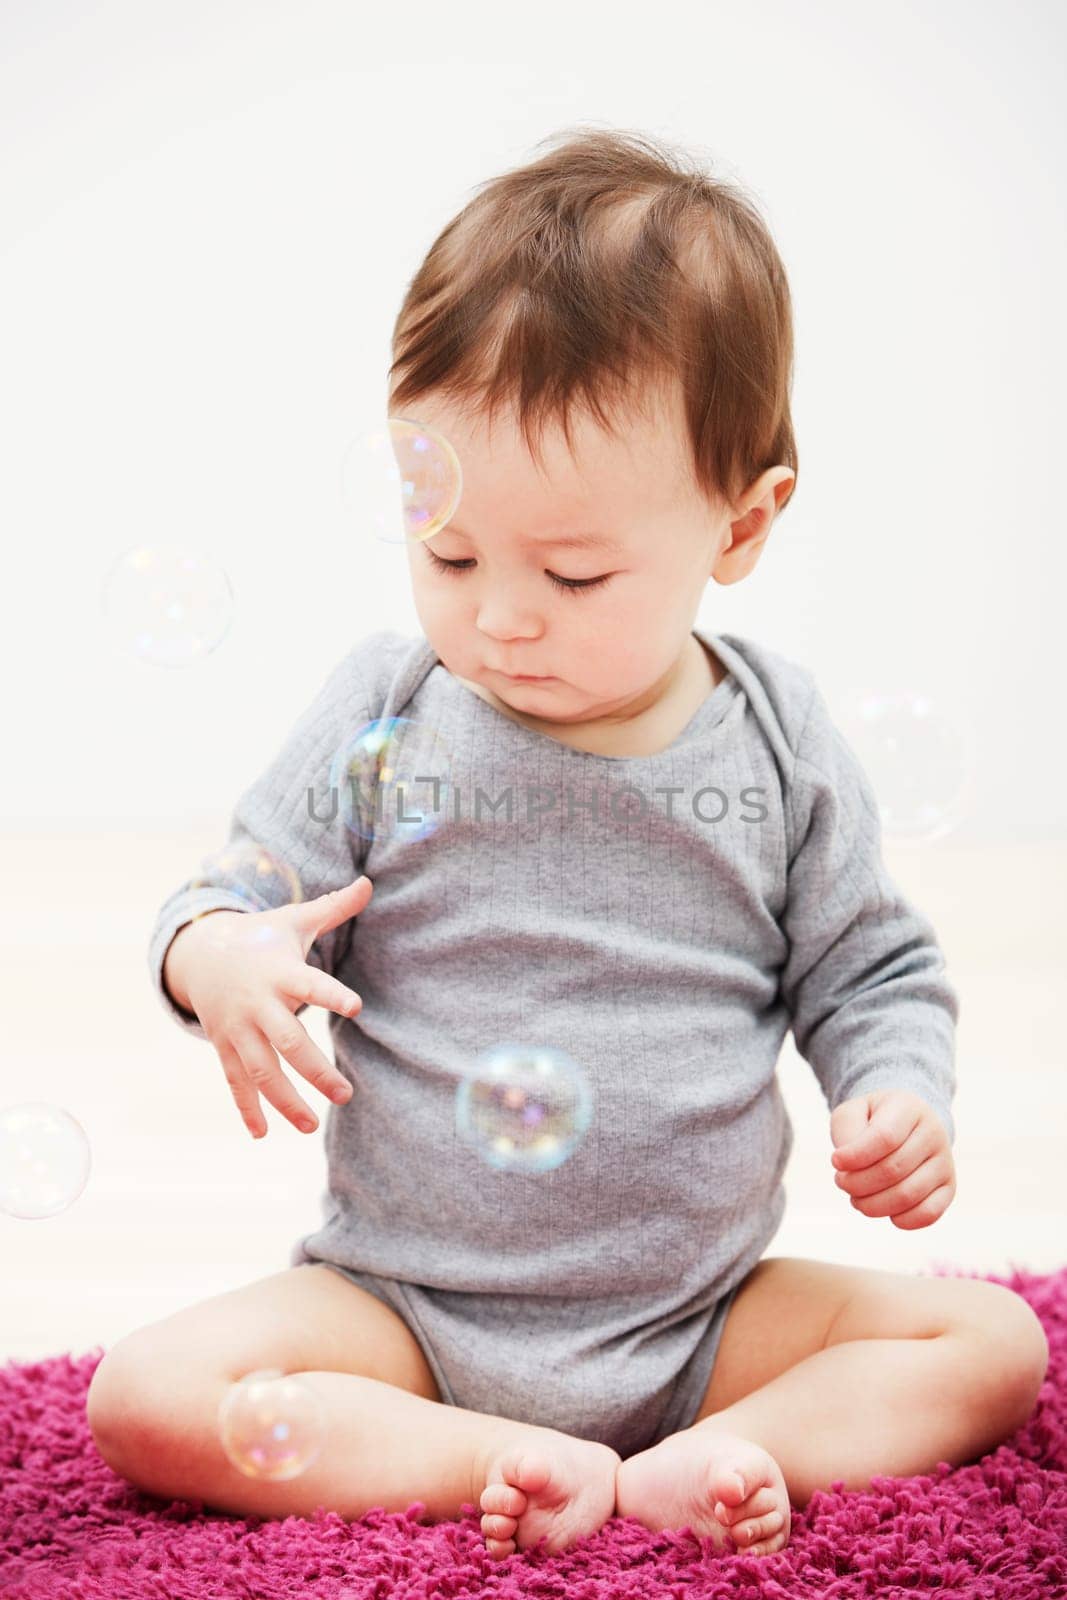 Baby, bubbles and playing game in home for childhood development, curious wondering or education. Kid, growth toys and mockup space or learning progress for sensory, coordination or entertainment.